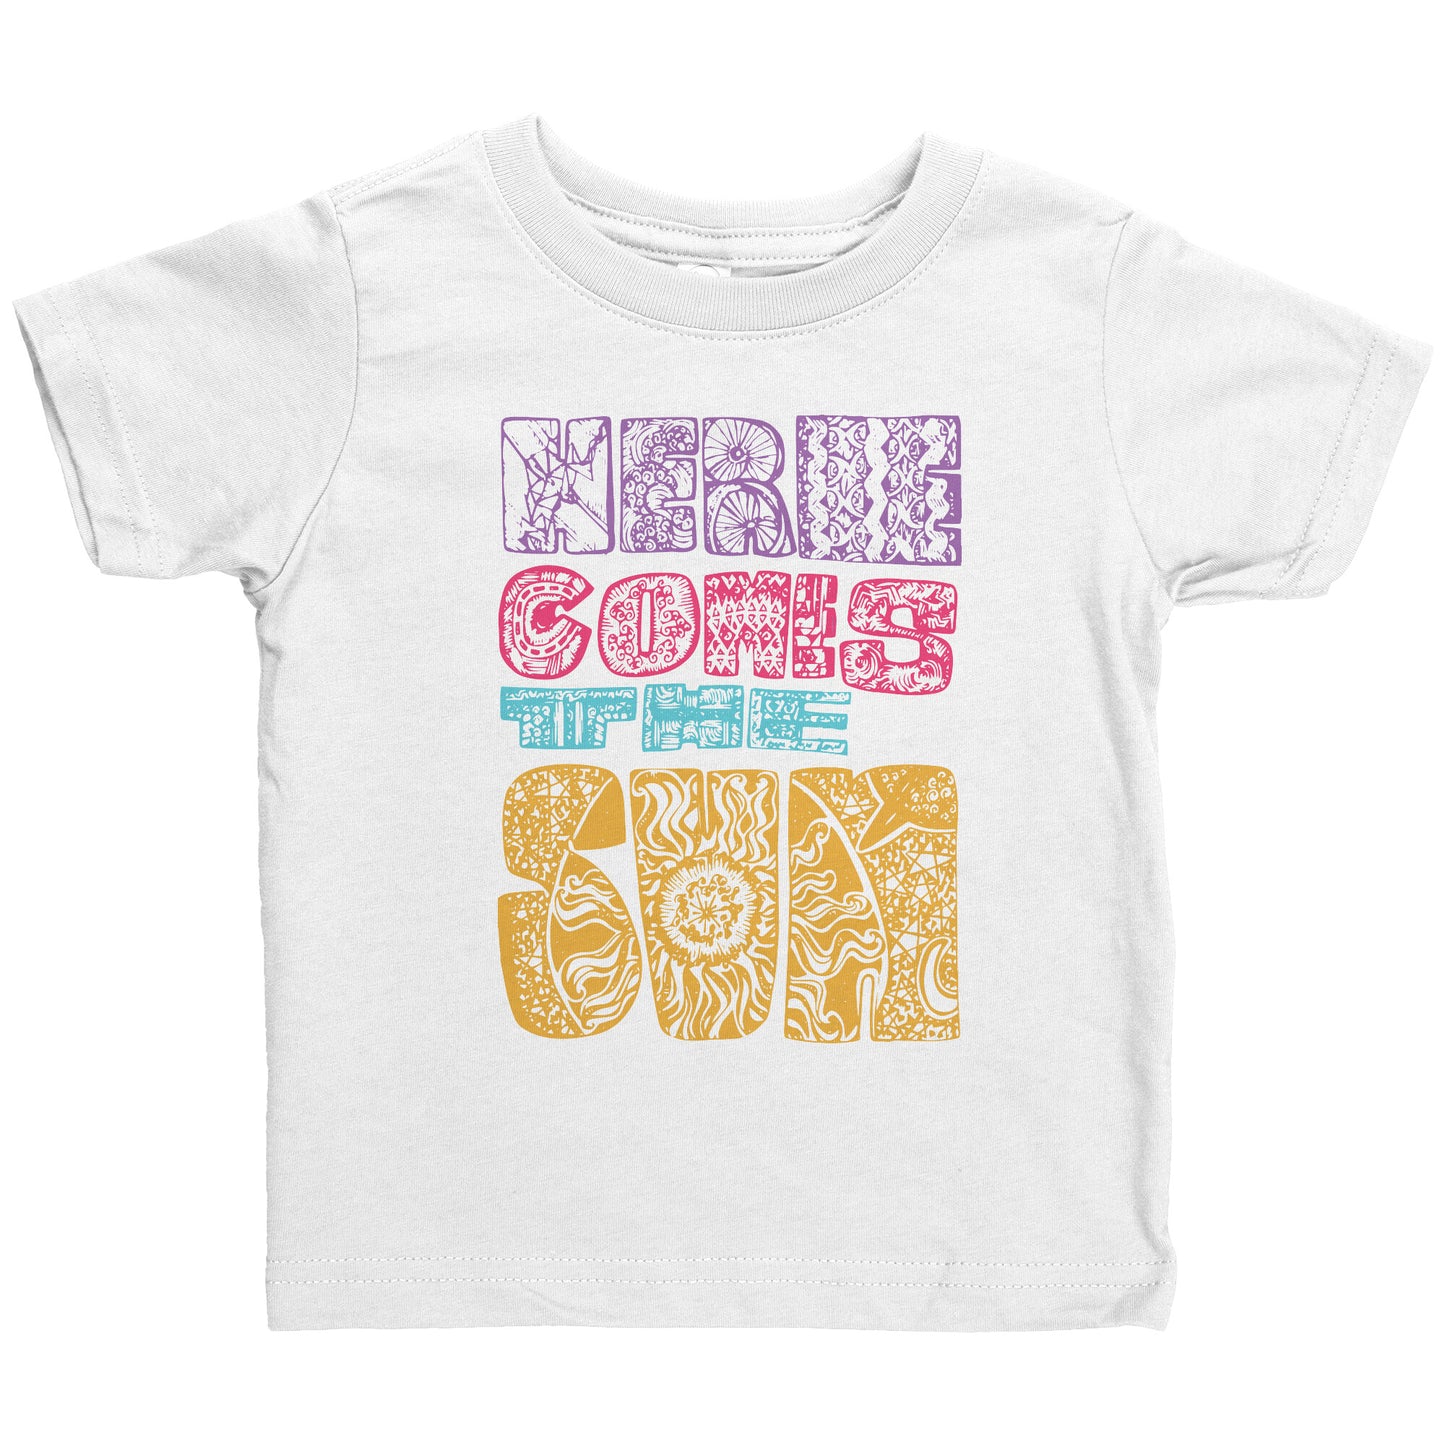 Here Comes The Sun Infant Shirt